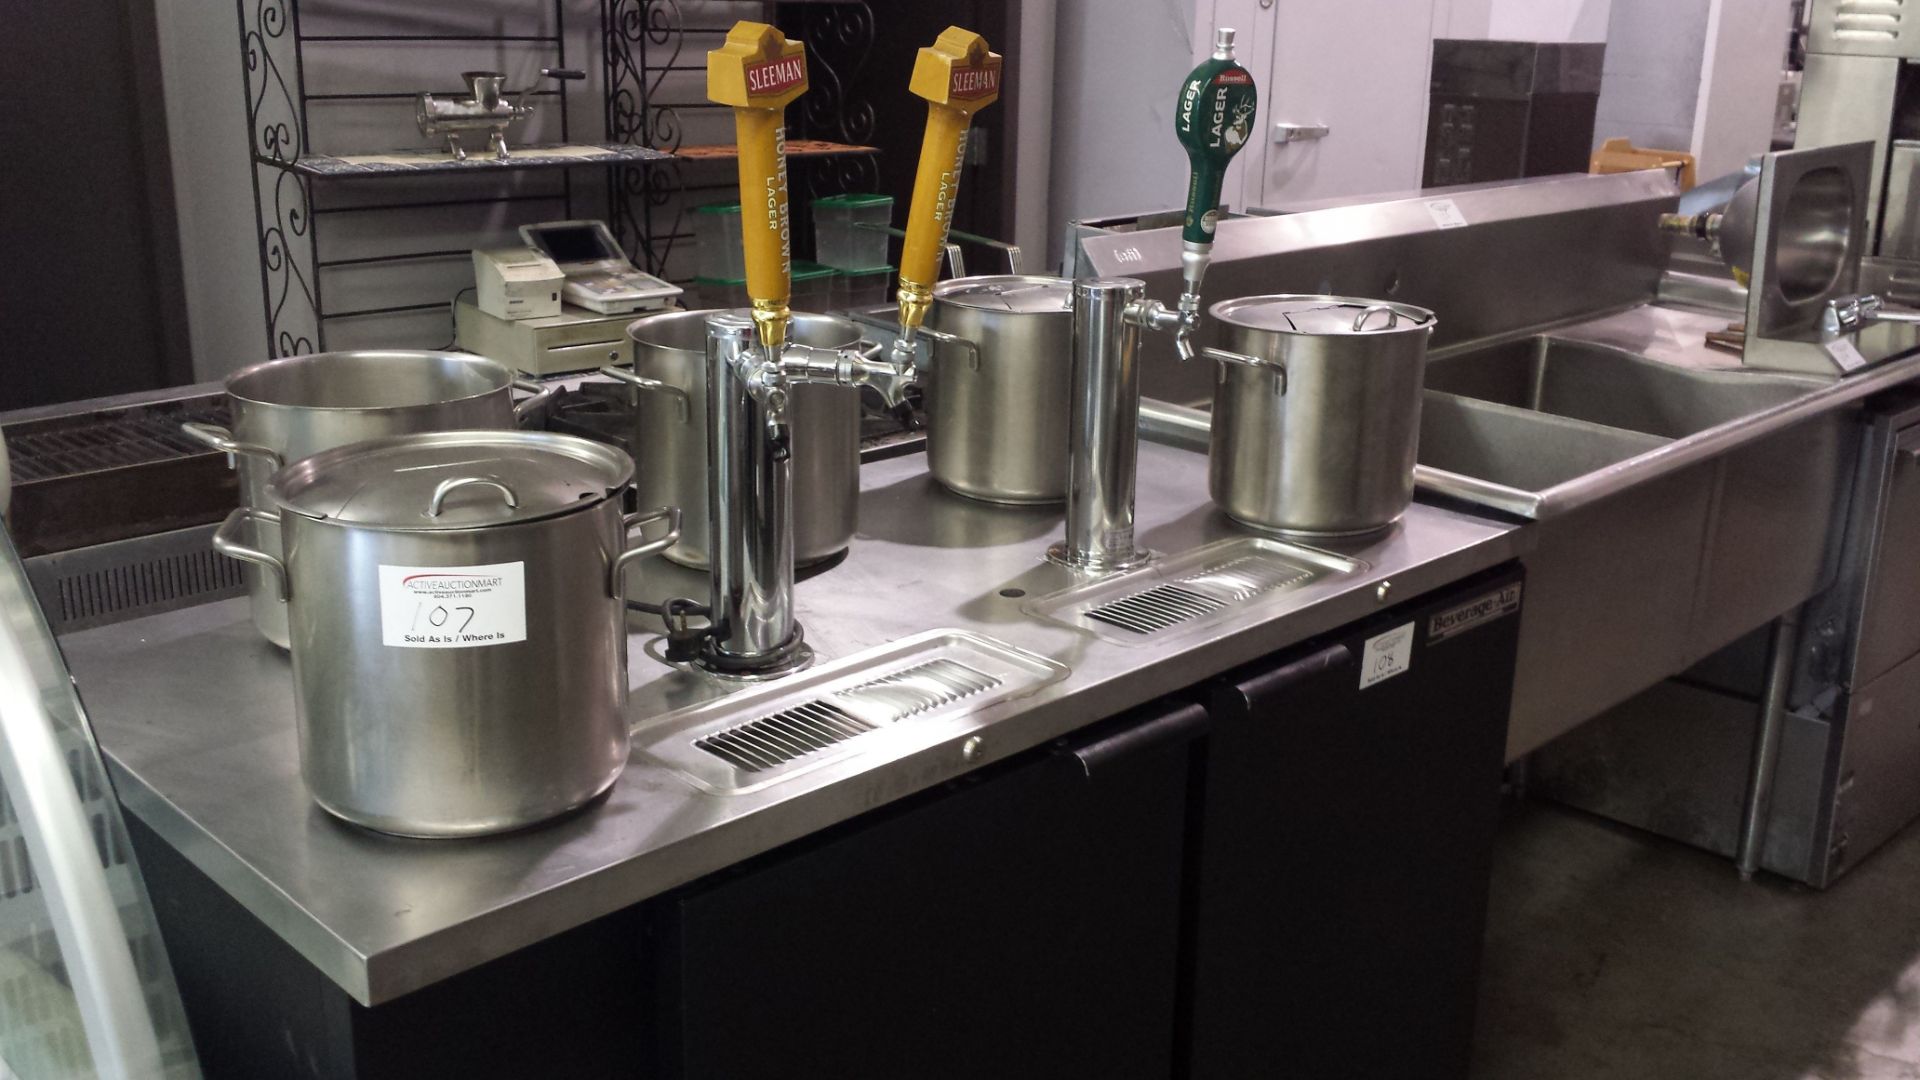 5 stainless steel pots with 4 lids